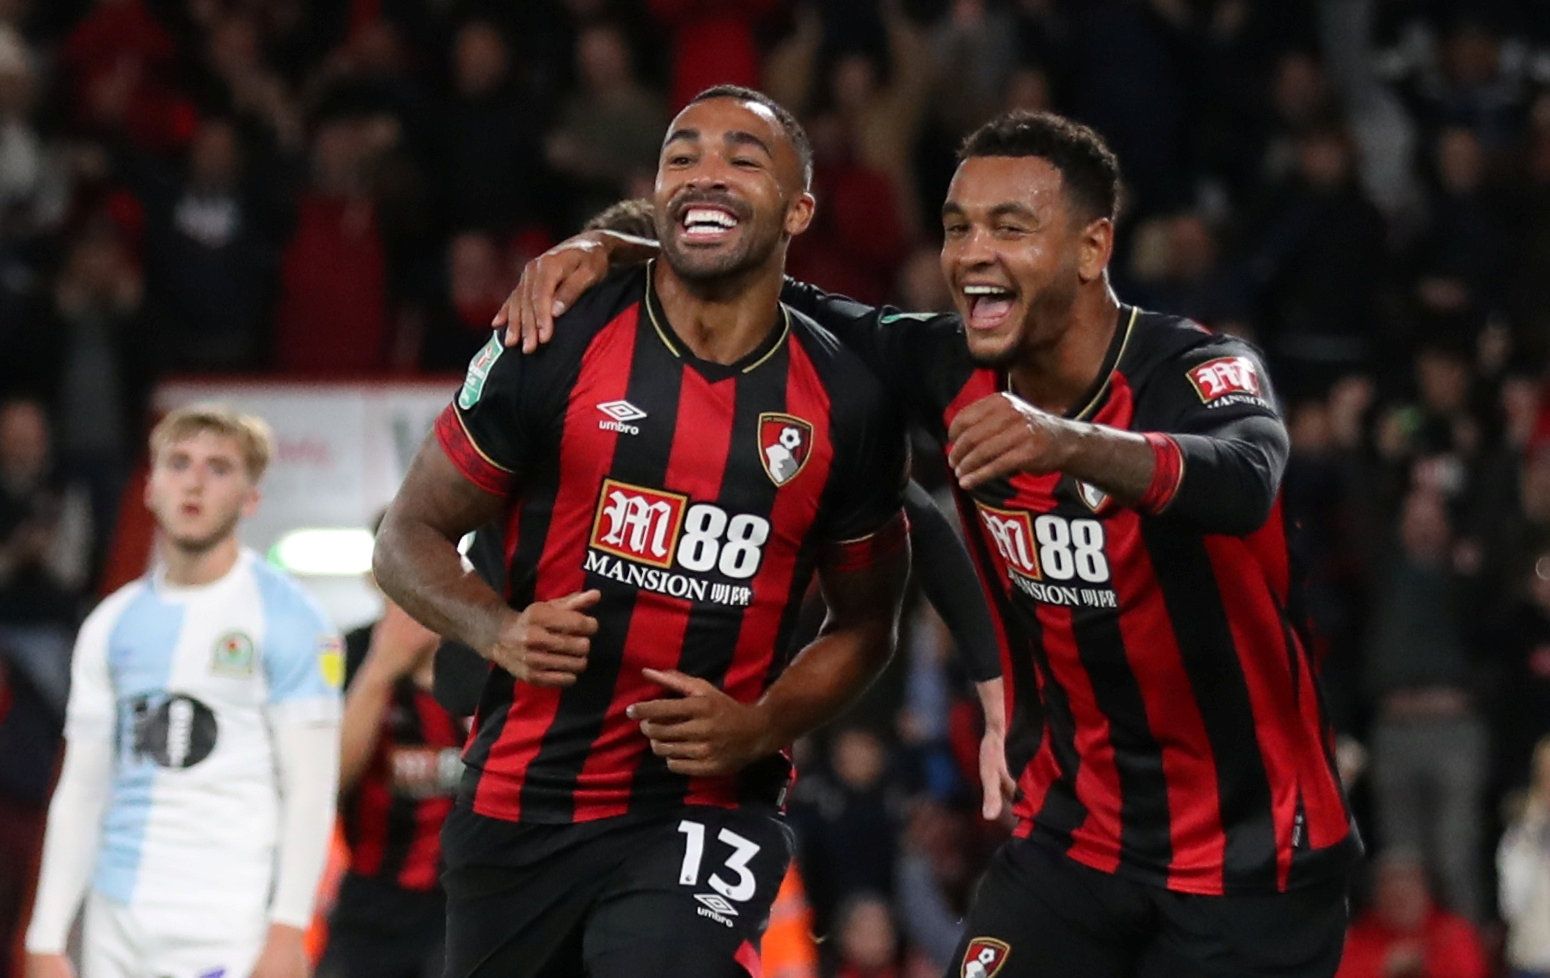 Soccer Football - Carabao Cup - Third Round - AFC Bournemouth v Blackburn Rovers - Vitality Stadium, Bournemouth, Britain - September 25, 2018  Bournemouth's Callum Wilson celebrates scoring their third goal with Joshua King            Action Images via Reuters/Peter Cziborra  EDITORIAL USE ONLY. No use with unauthorized audio, video, data, fixture lists, club/league logos or "live" services. Online in-match use limited to 75 images, no video emulation. No use in betting, games or single club/le